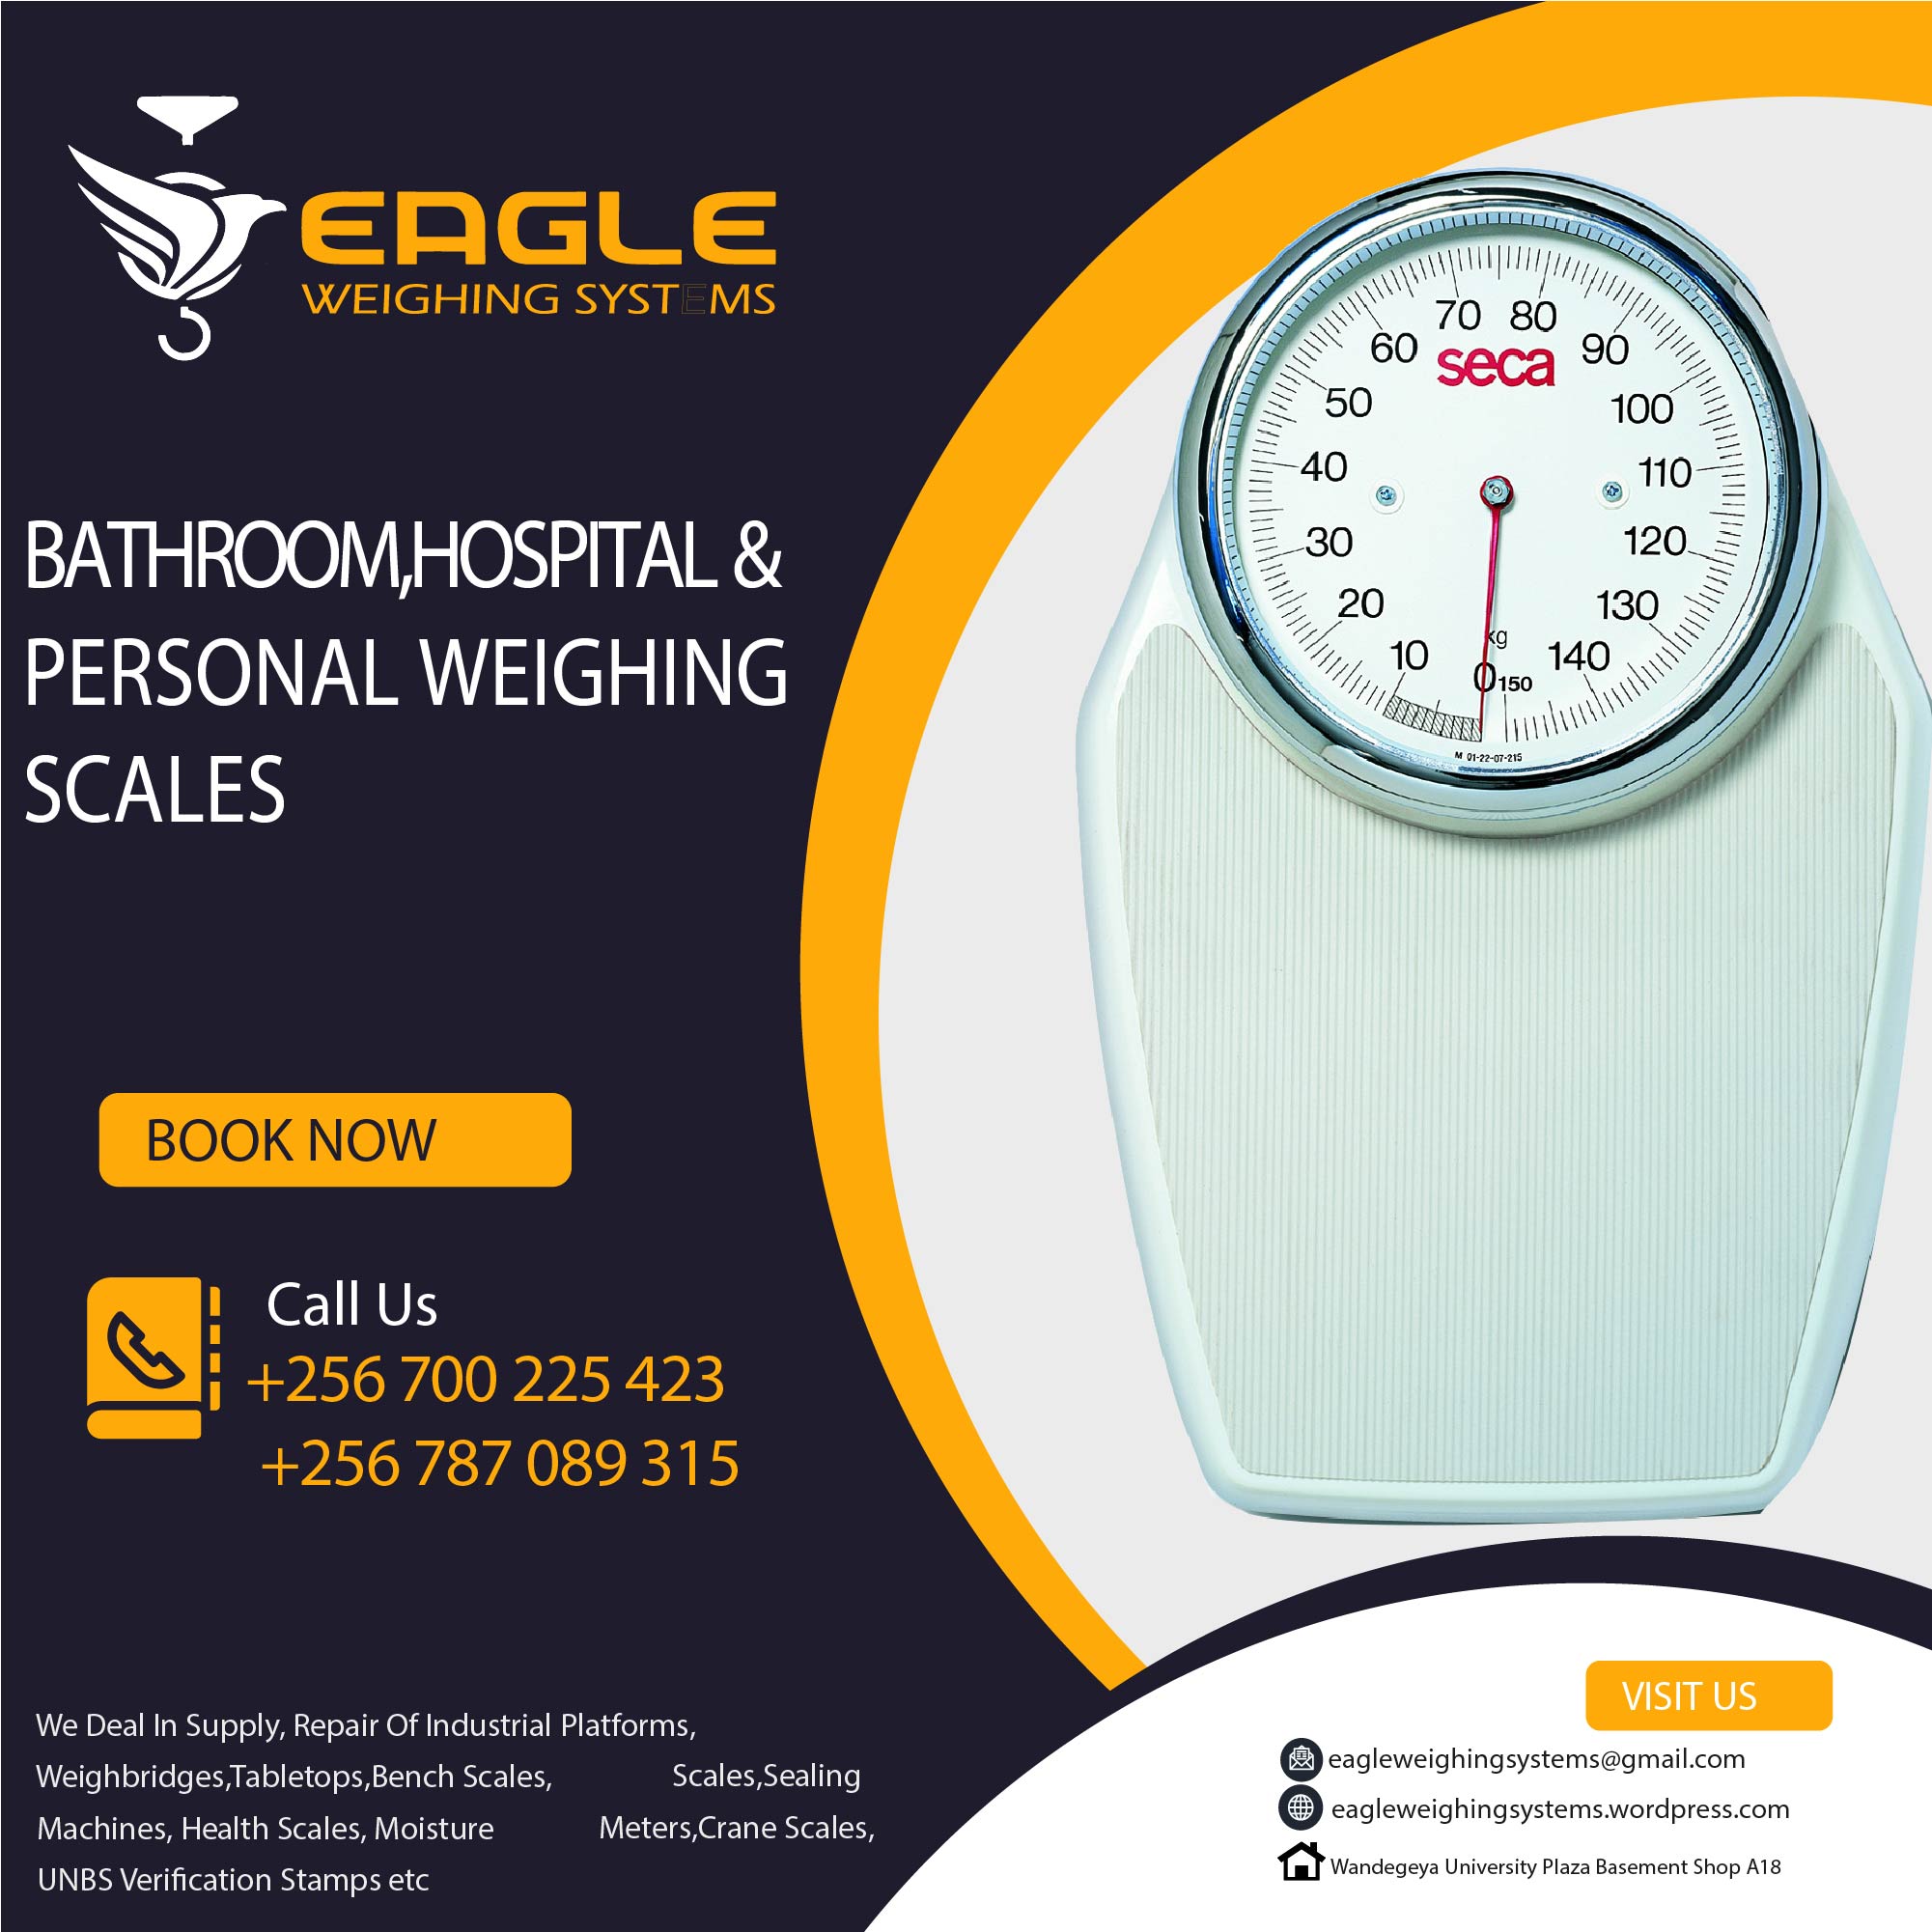 Body weight loss weighing scales in kampala, Kampala Central Division, Central, Uganda